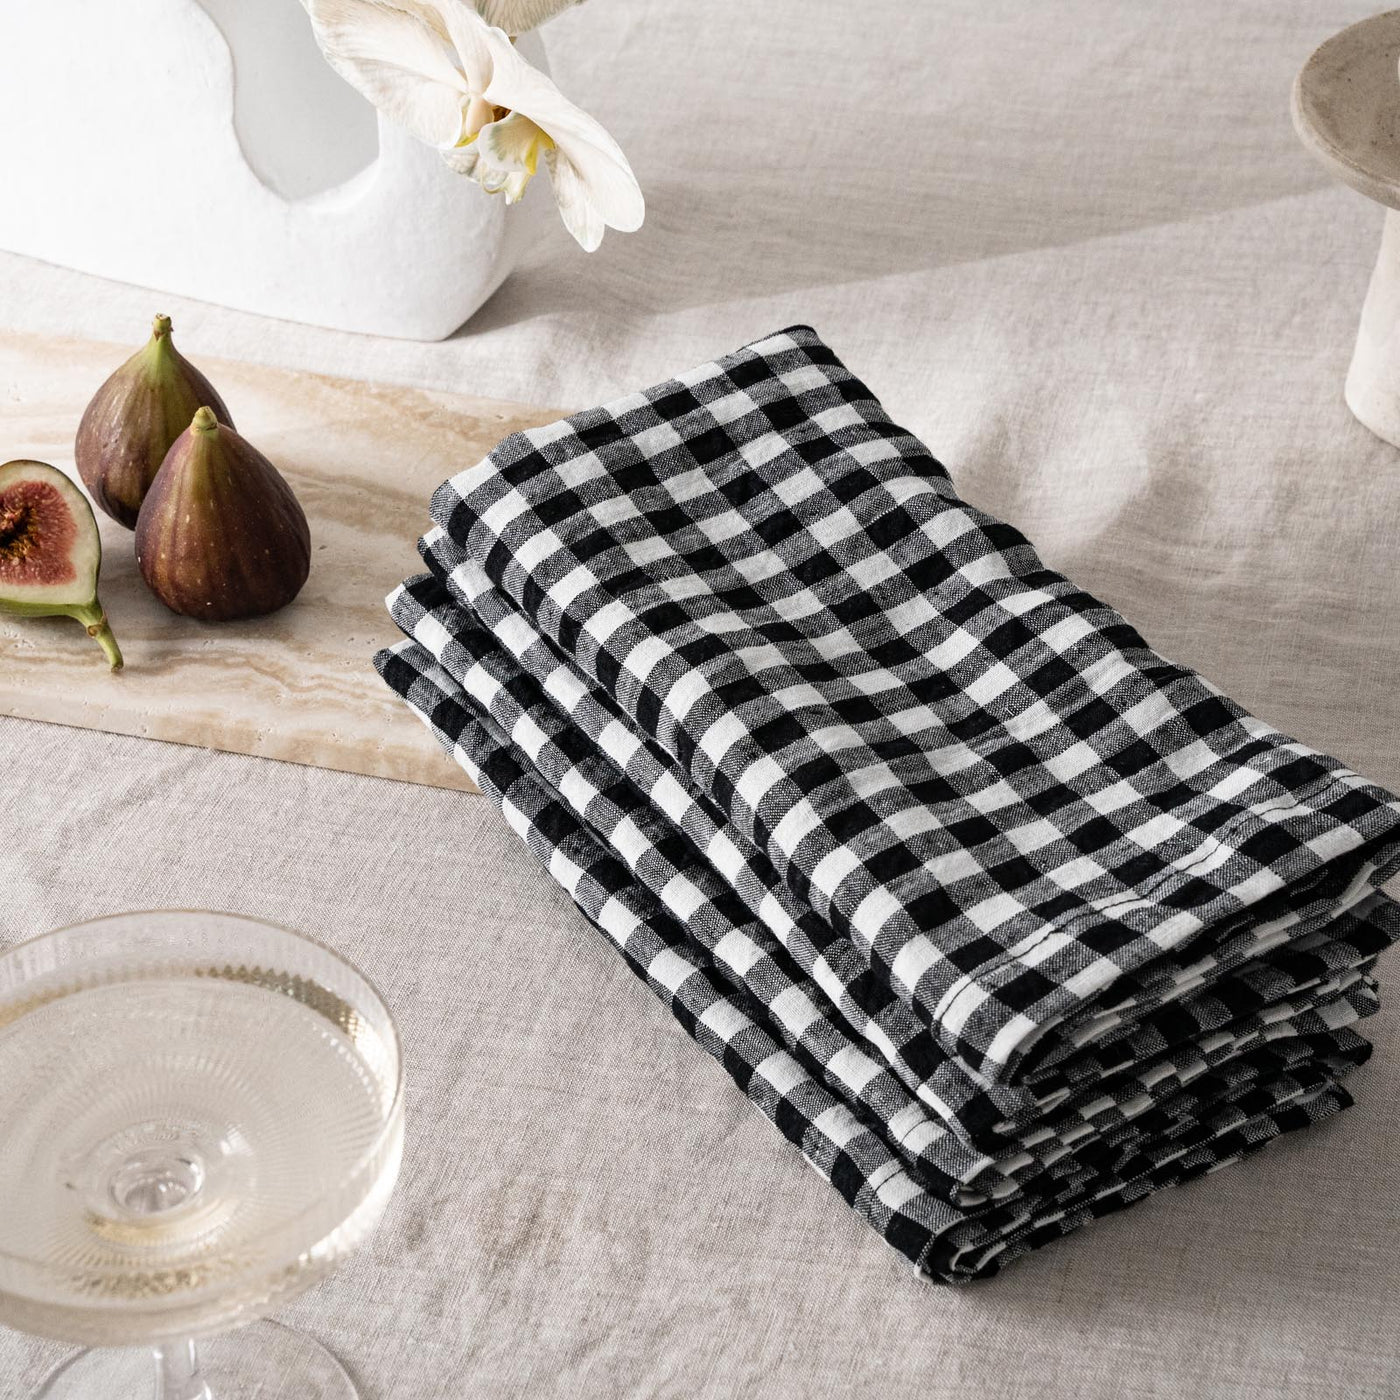 French Flax Linen Napkins (Set of 4) in Charcoal Gingham